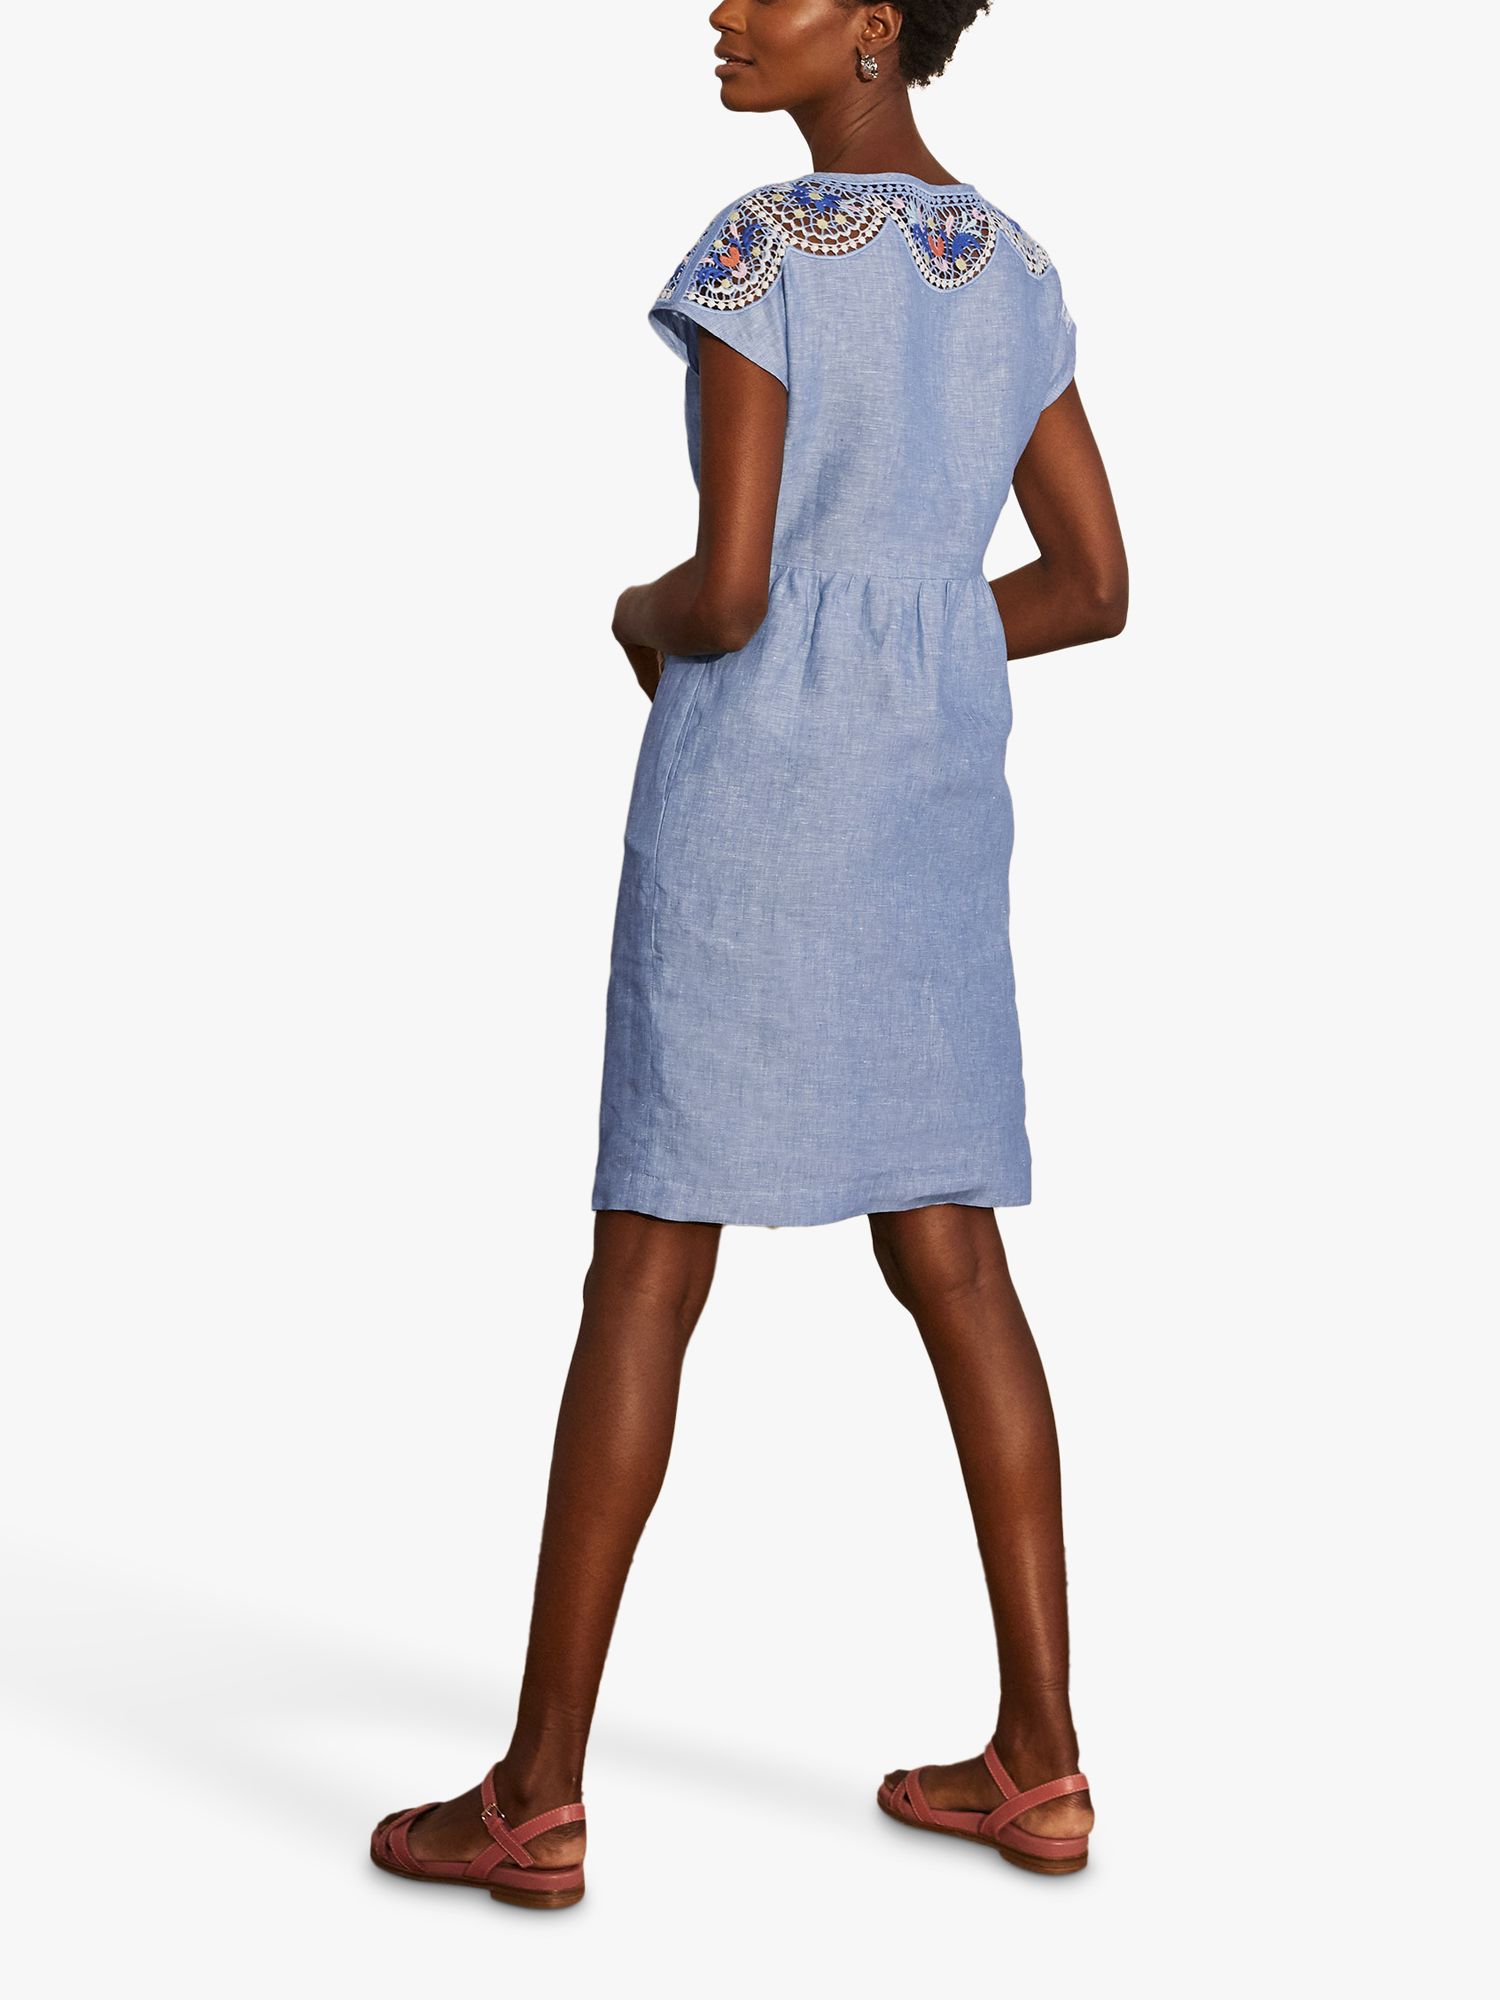 Boden Fleur Linen Embroidered Dress, Chambray/Multi at John Lewis